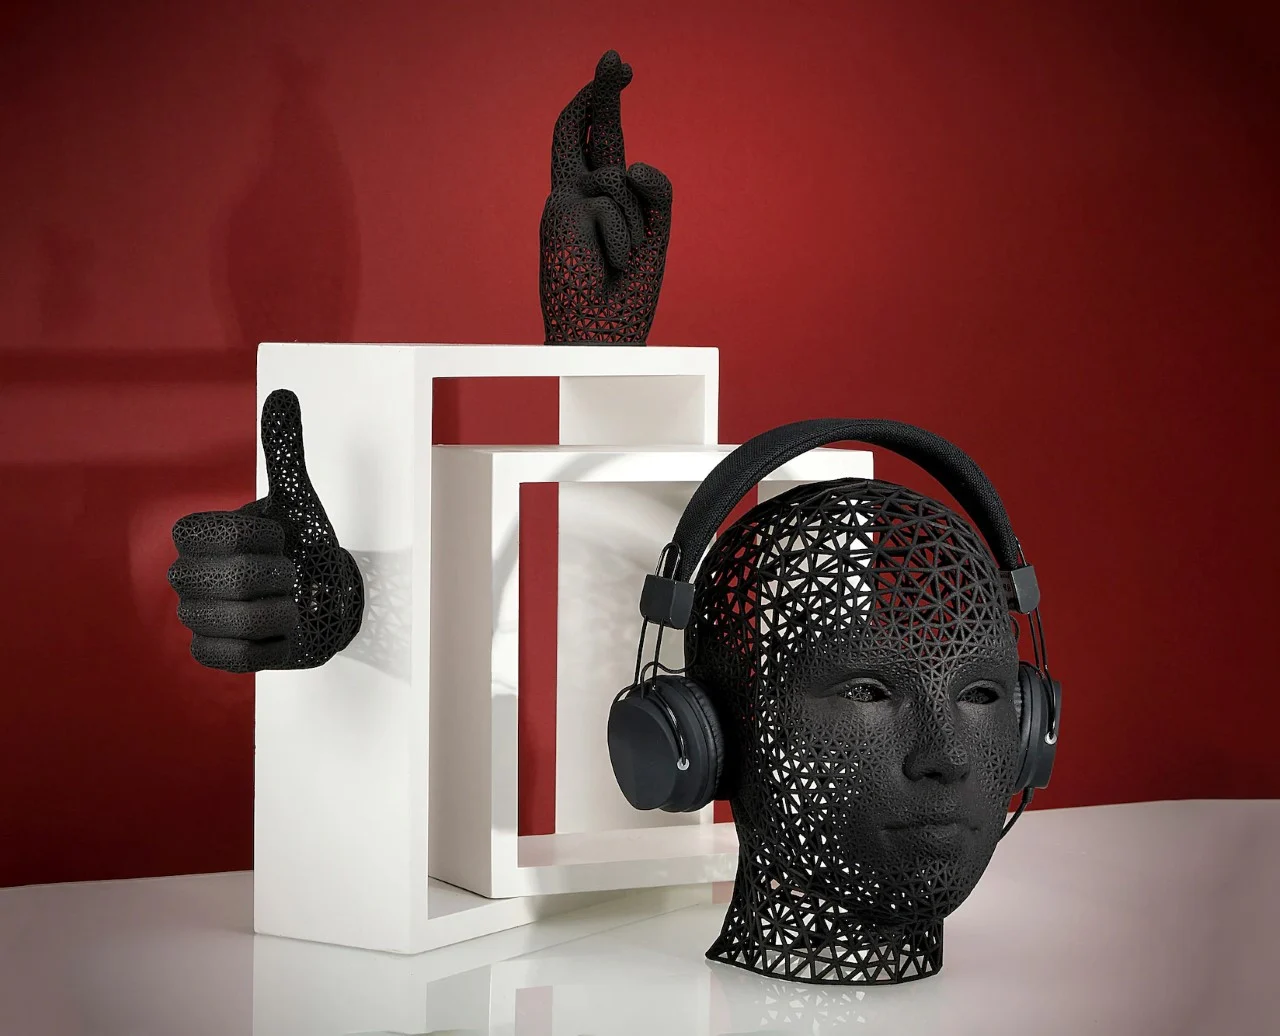 The Designs Feature A Human Head And Hands